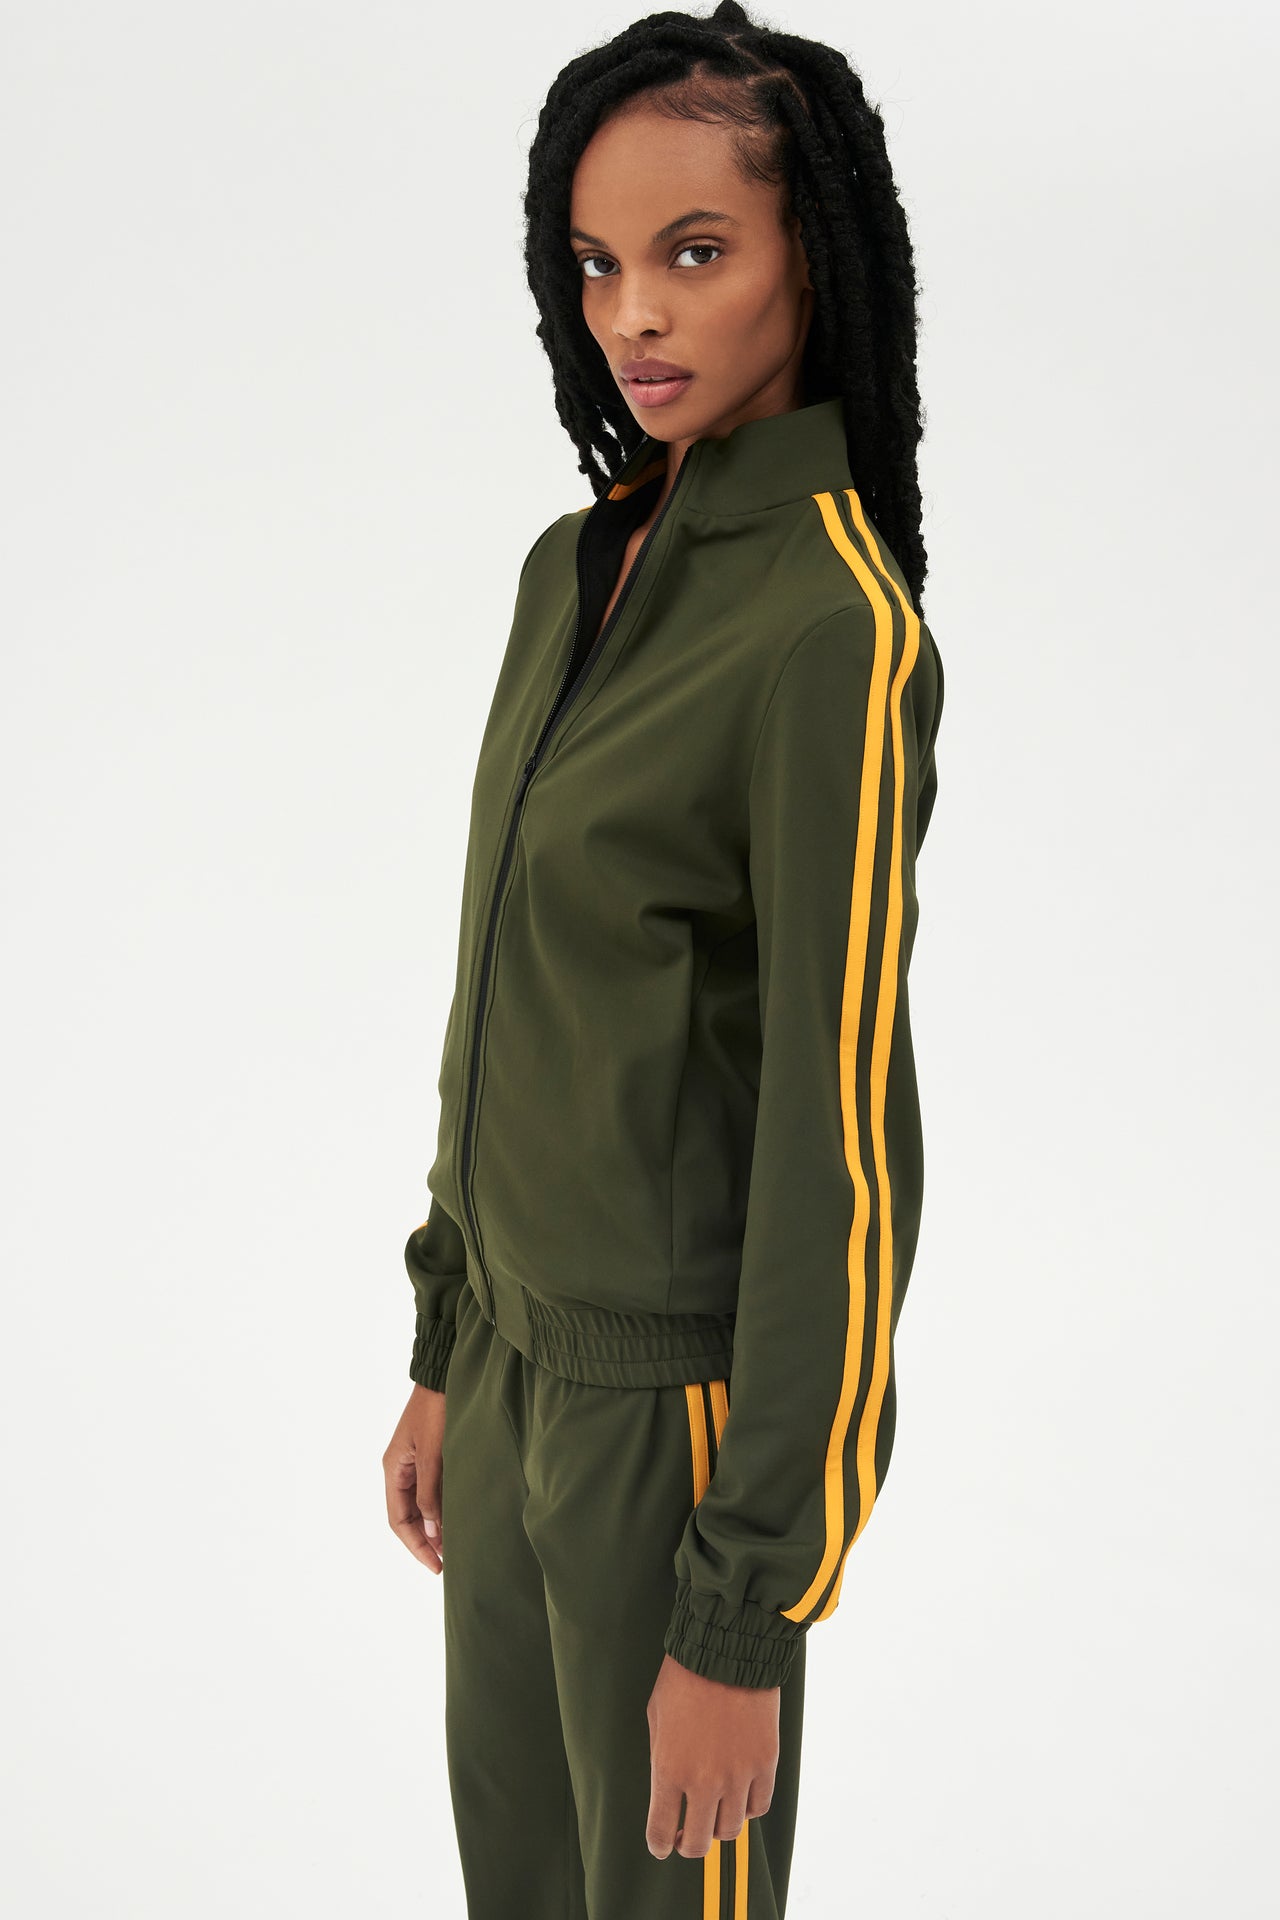 Side view of girl wearing dark green zip jacket that stops under chin with two yellow stripes down the side and a dark green sweatpants 